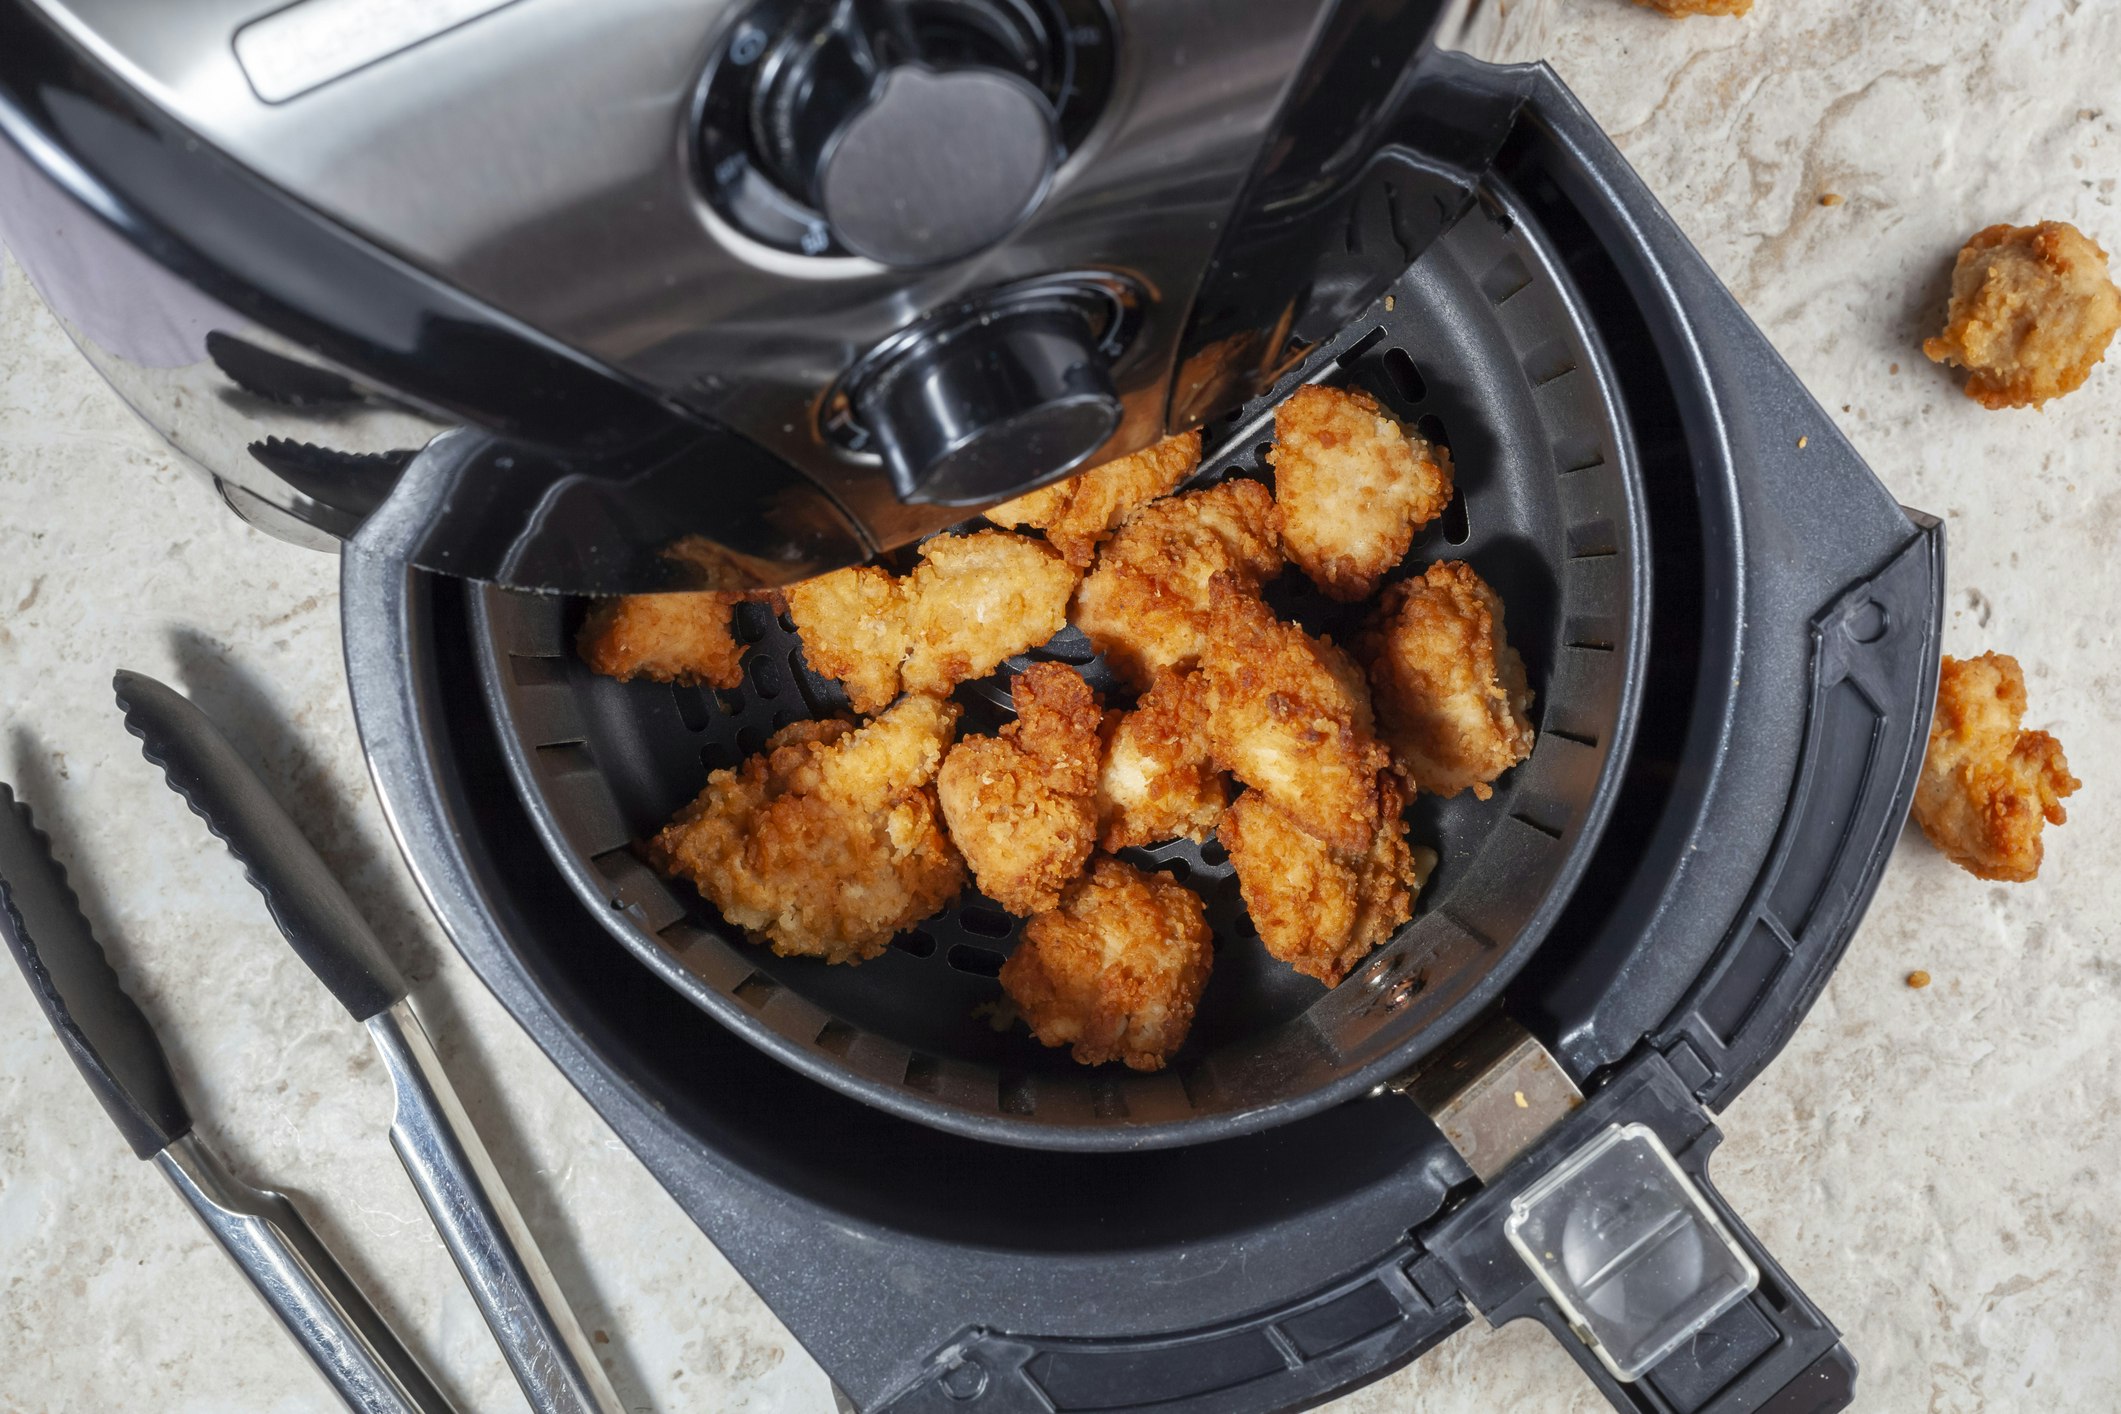 Ninja launches the Foodi FlexDrawer – their largest air fryer yet